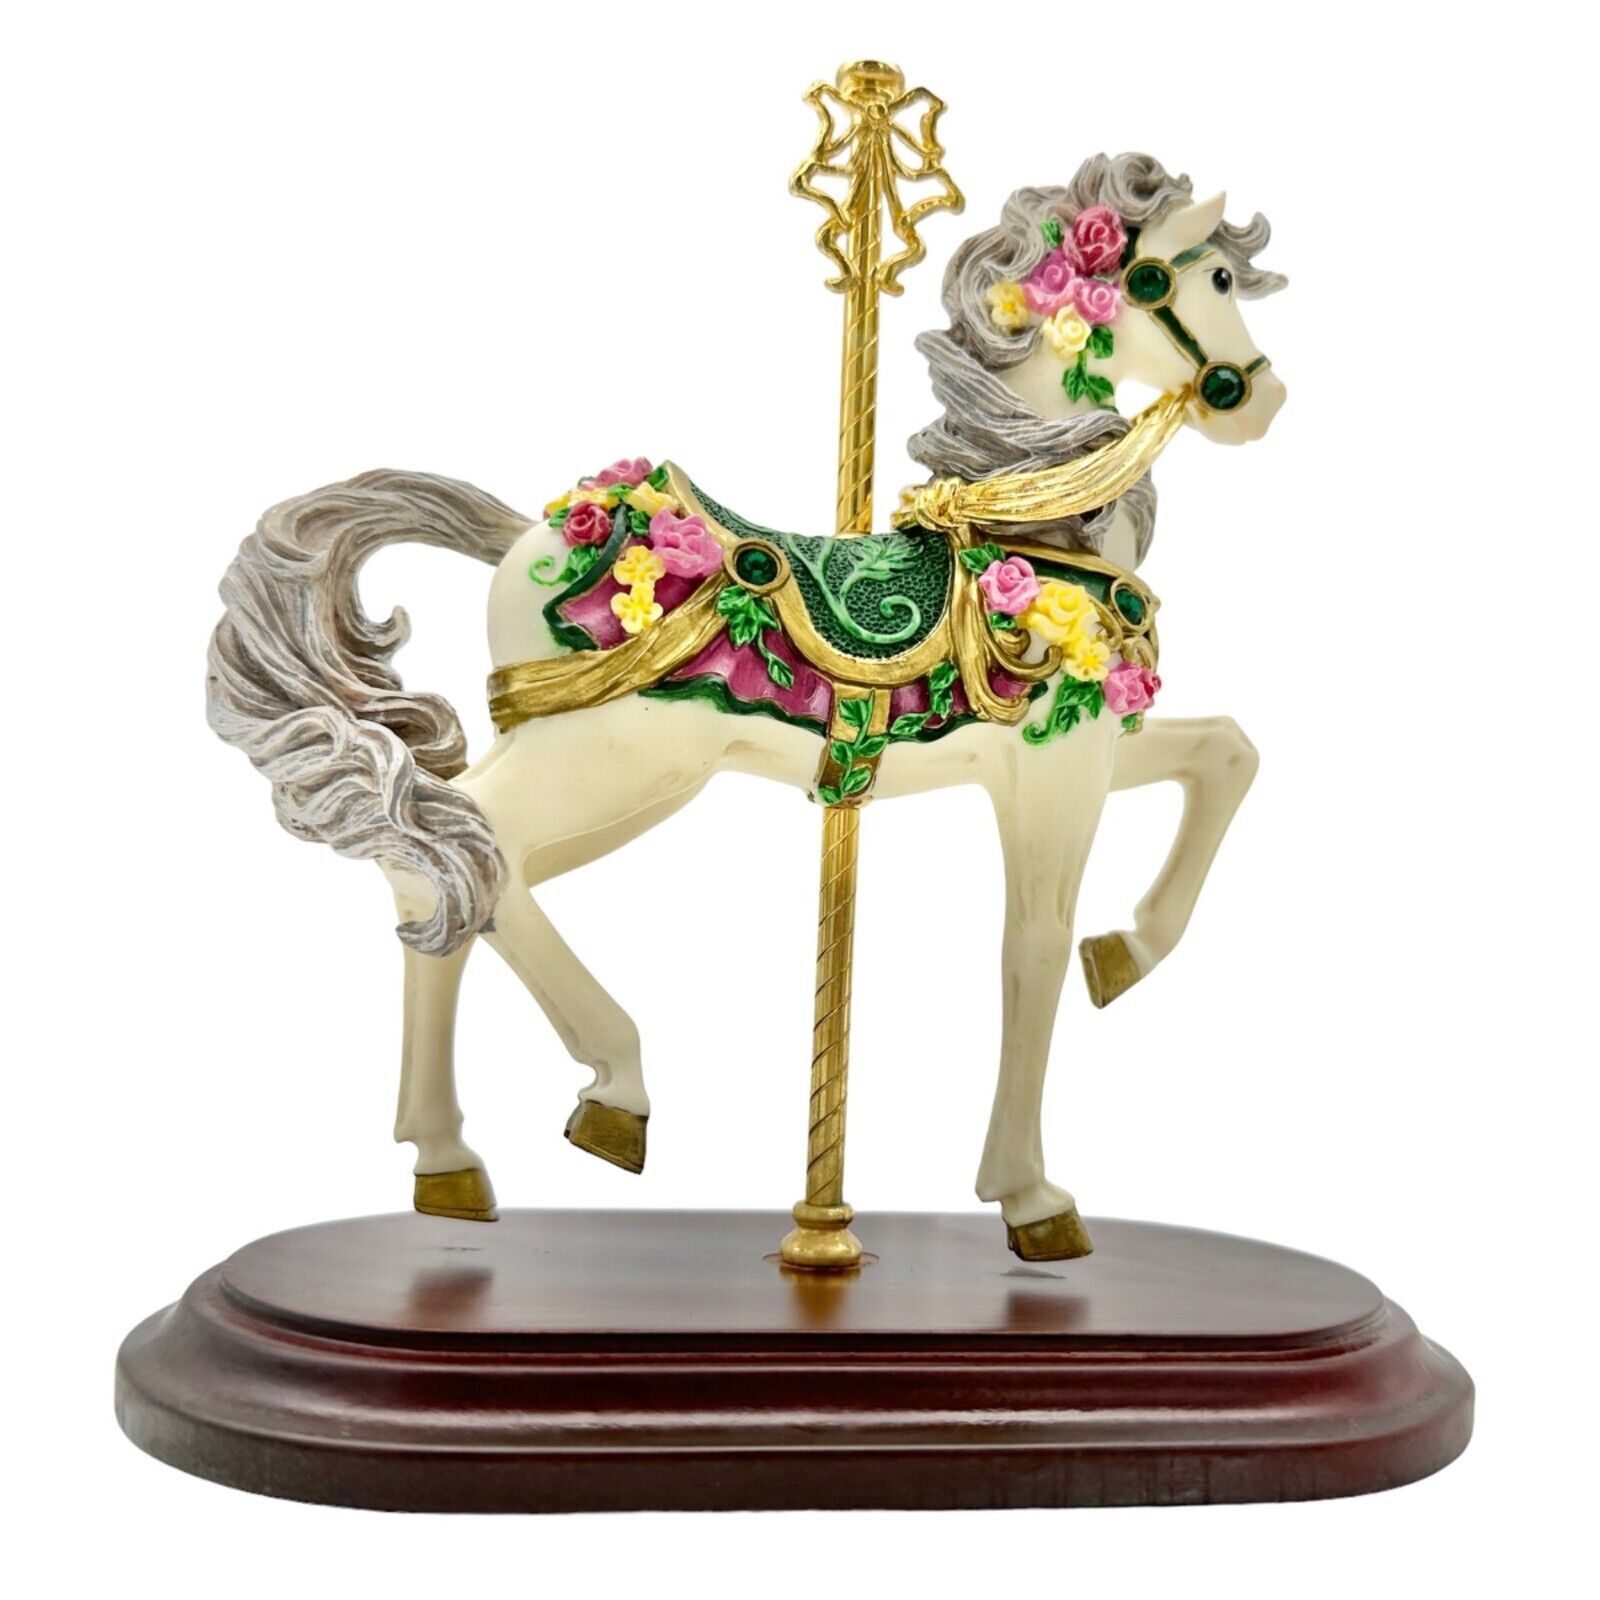 The Hamilton Collection Emerald Stander the Jeweled Carousel Horse Sculpture - $38.61